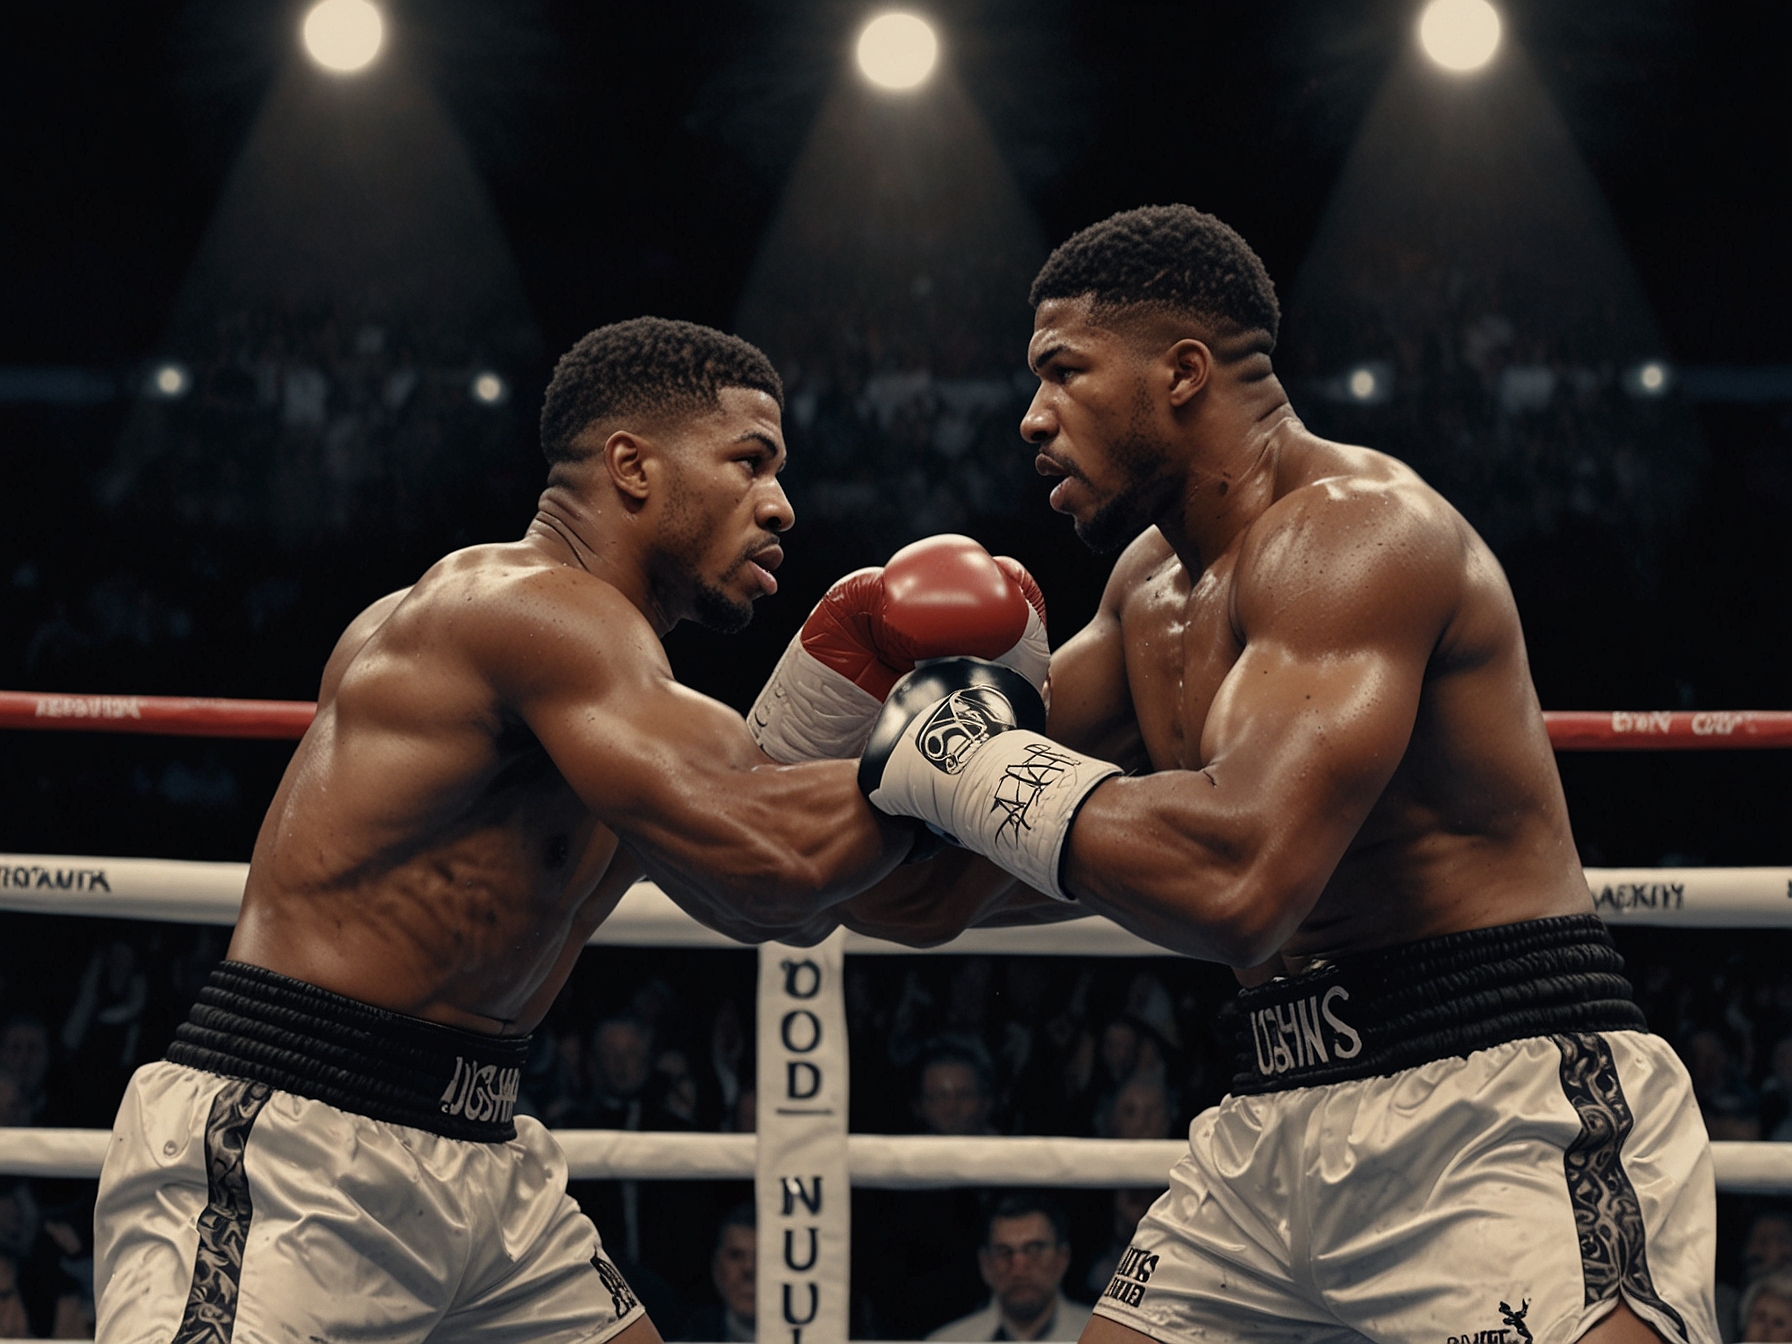 Anthony Joshua and Daniel Dubois face off during a heated pre-fight promotional event, with both boxers showing intense emotions and security stepping in to prevent a physical altercation.